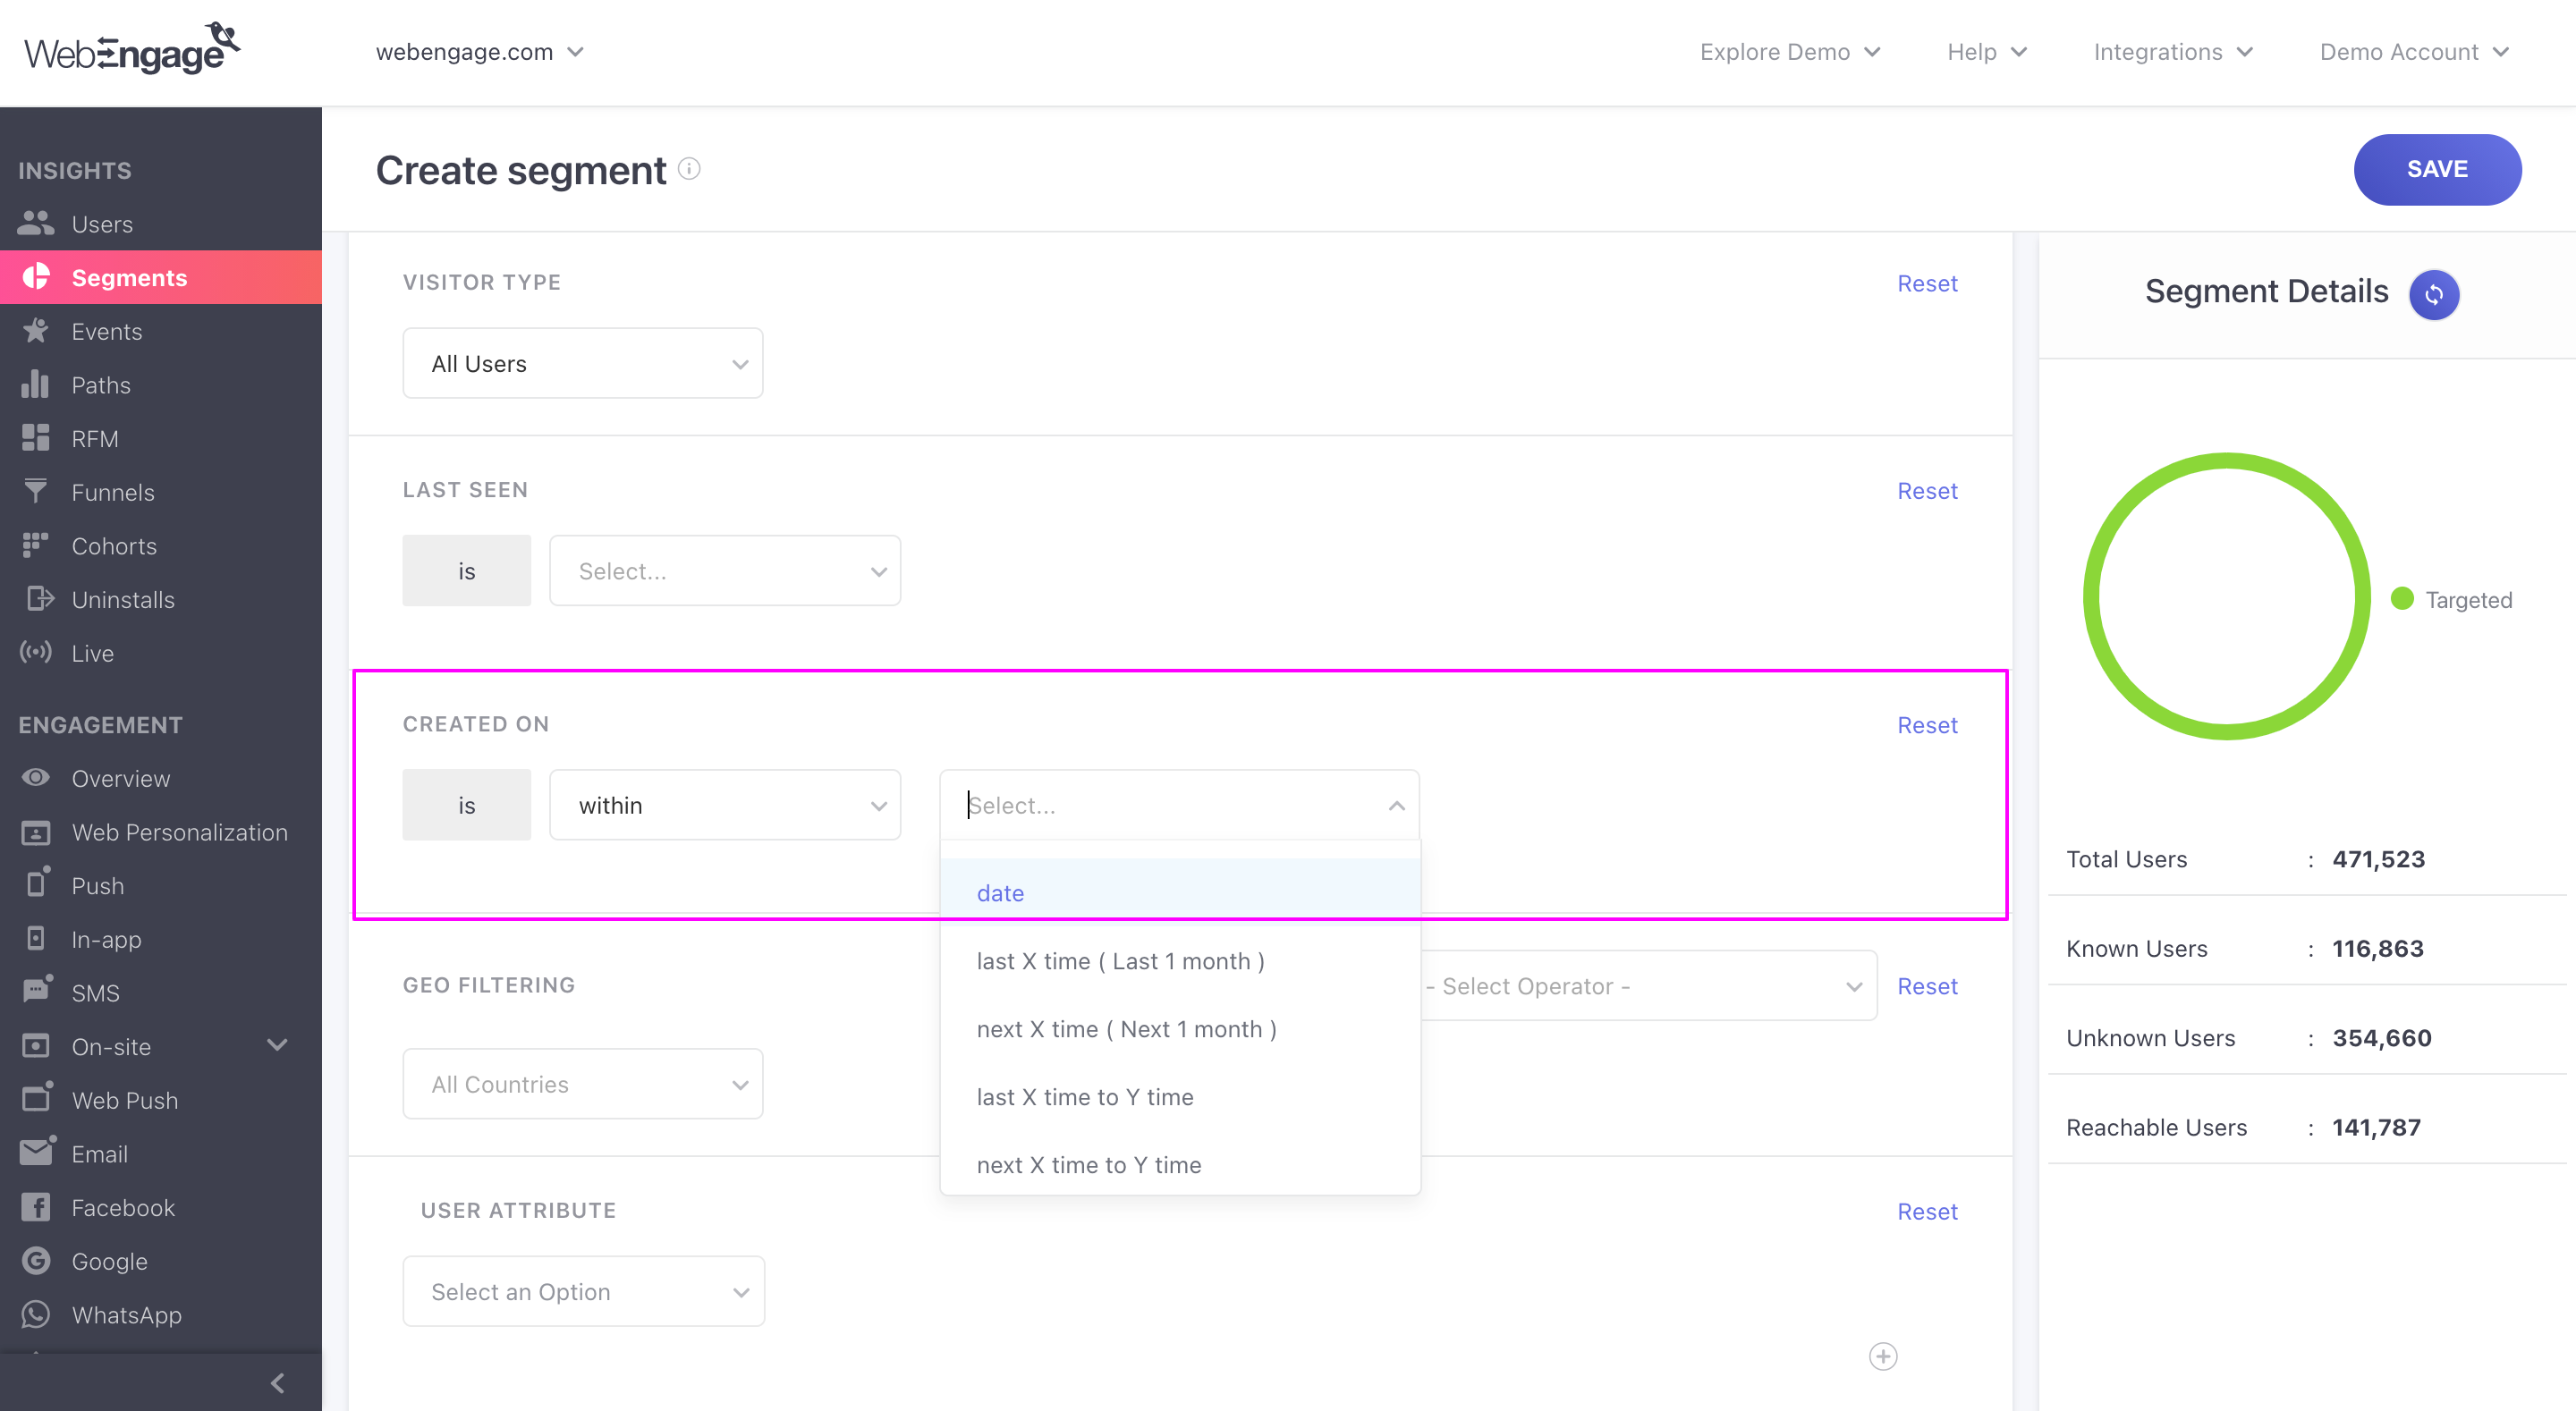 You can now create a segment using the user's 'Created On' date